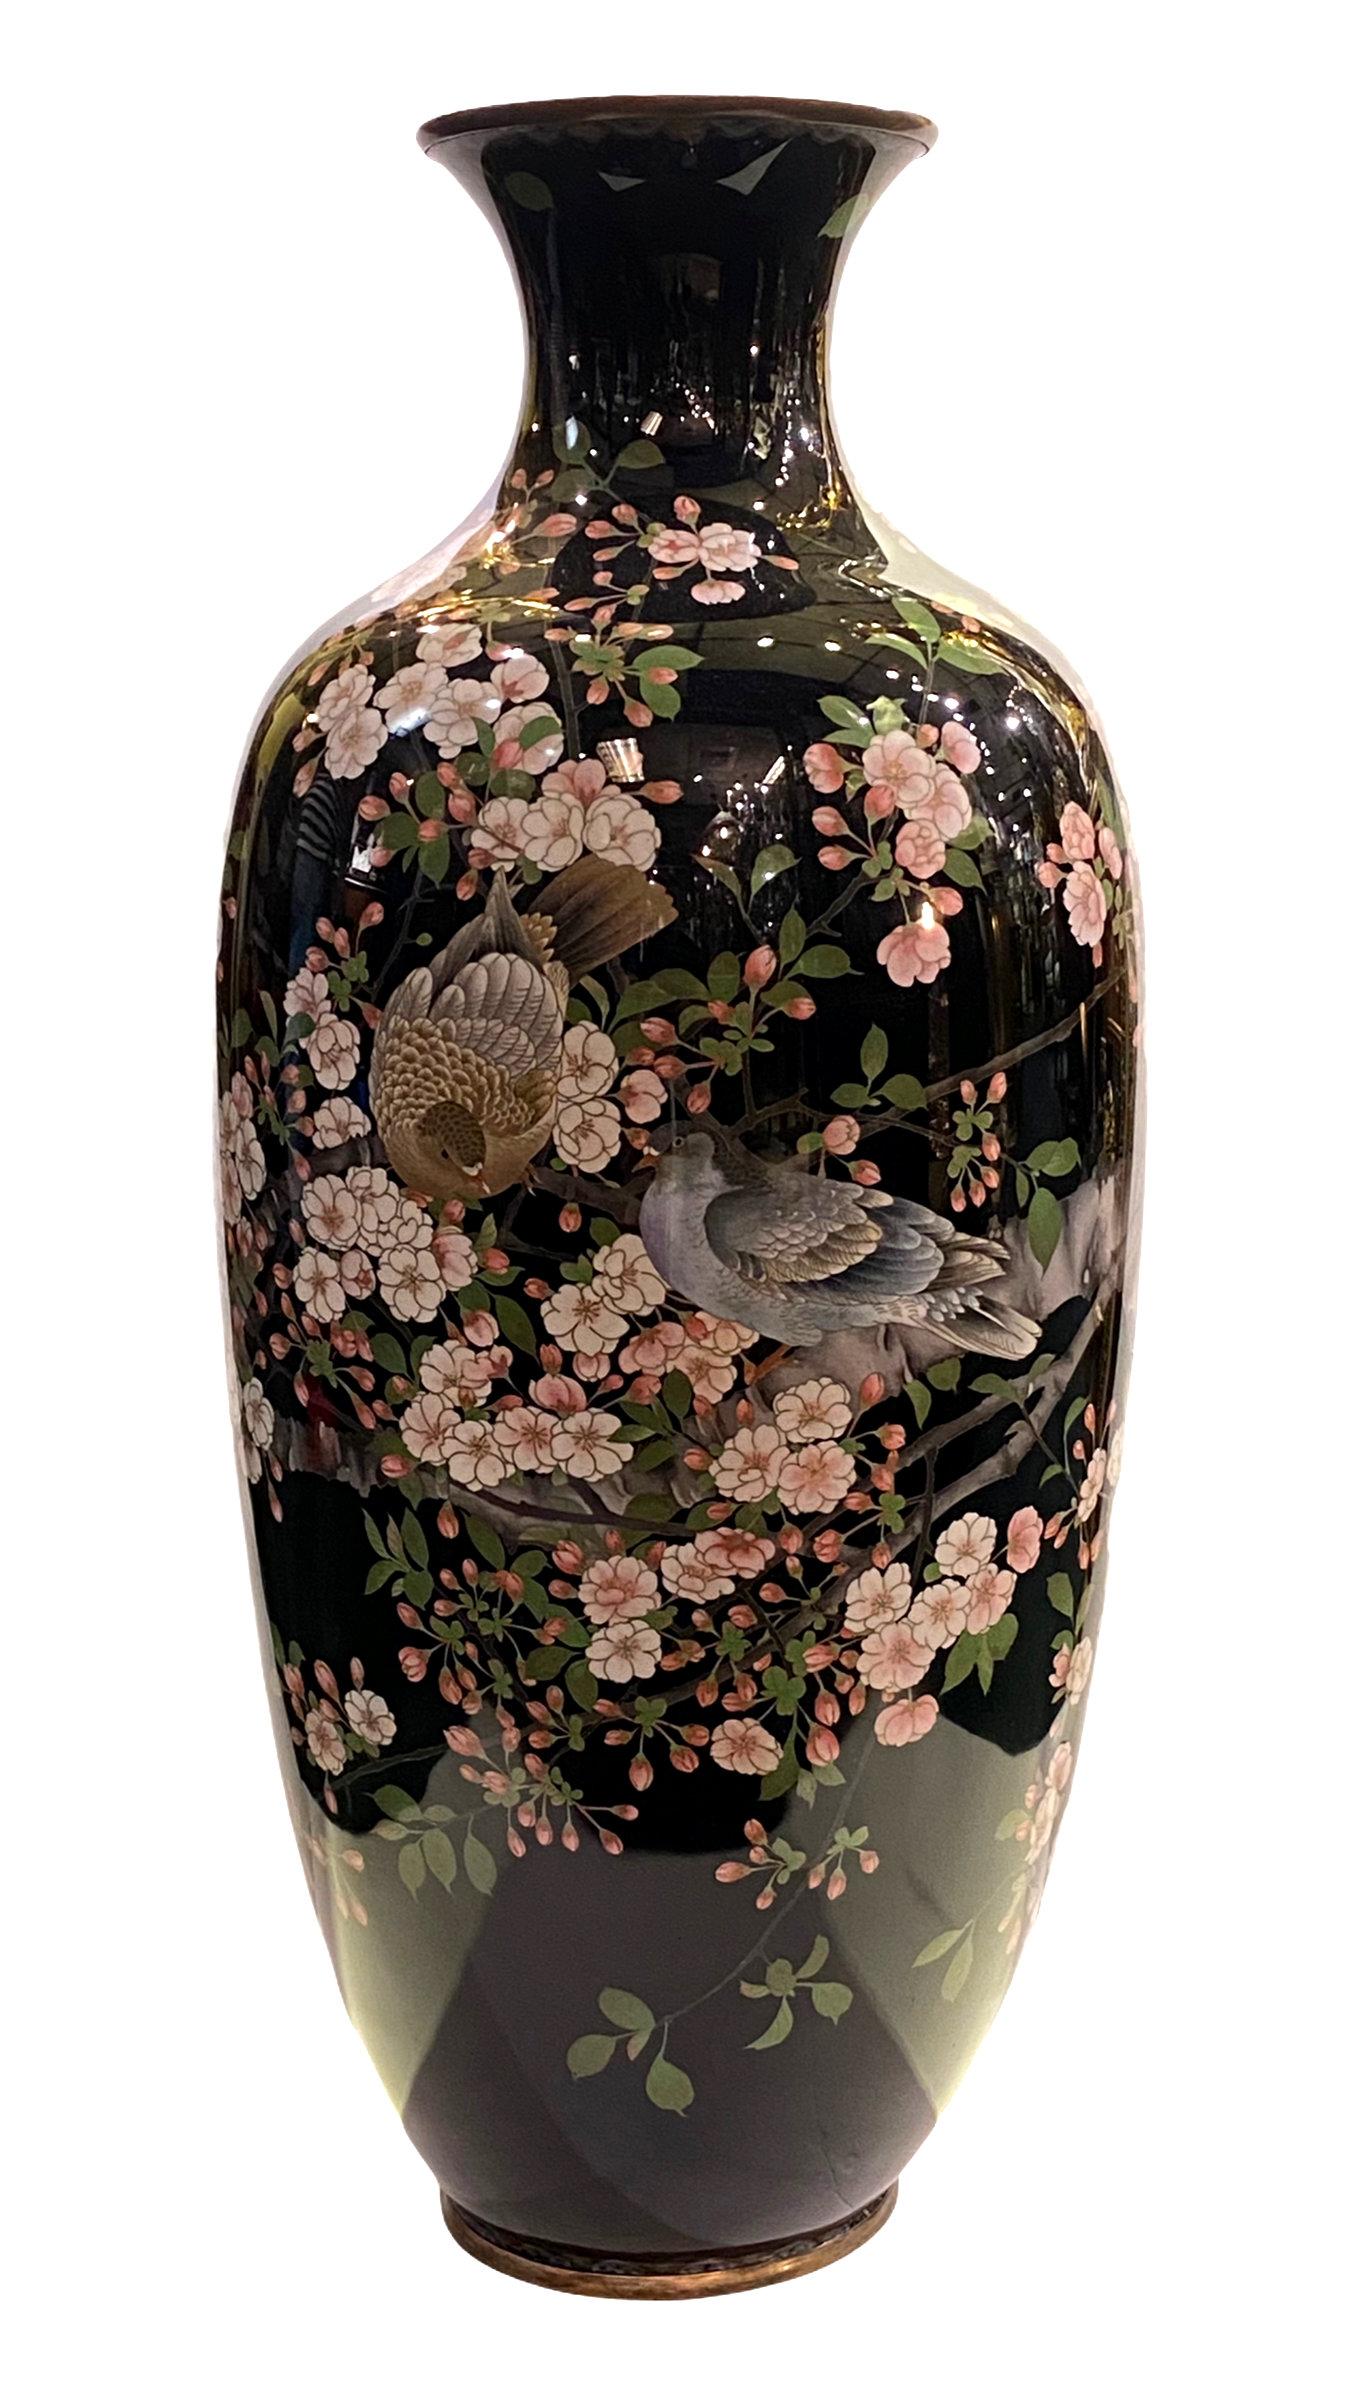 Large Meiji Period Japanese Cloisonné vase decorated with flowers and birds.